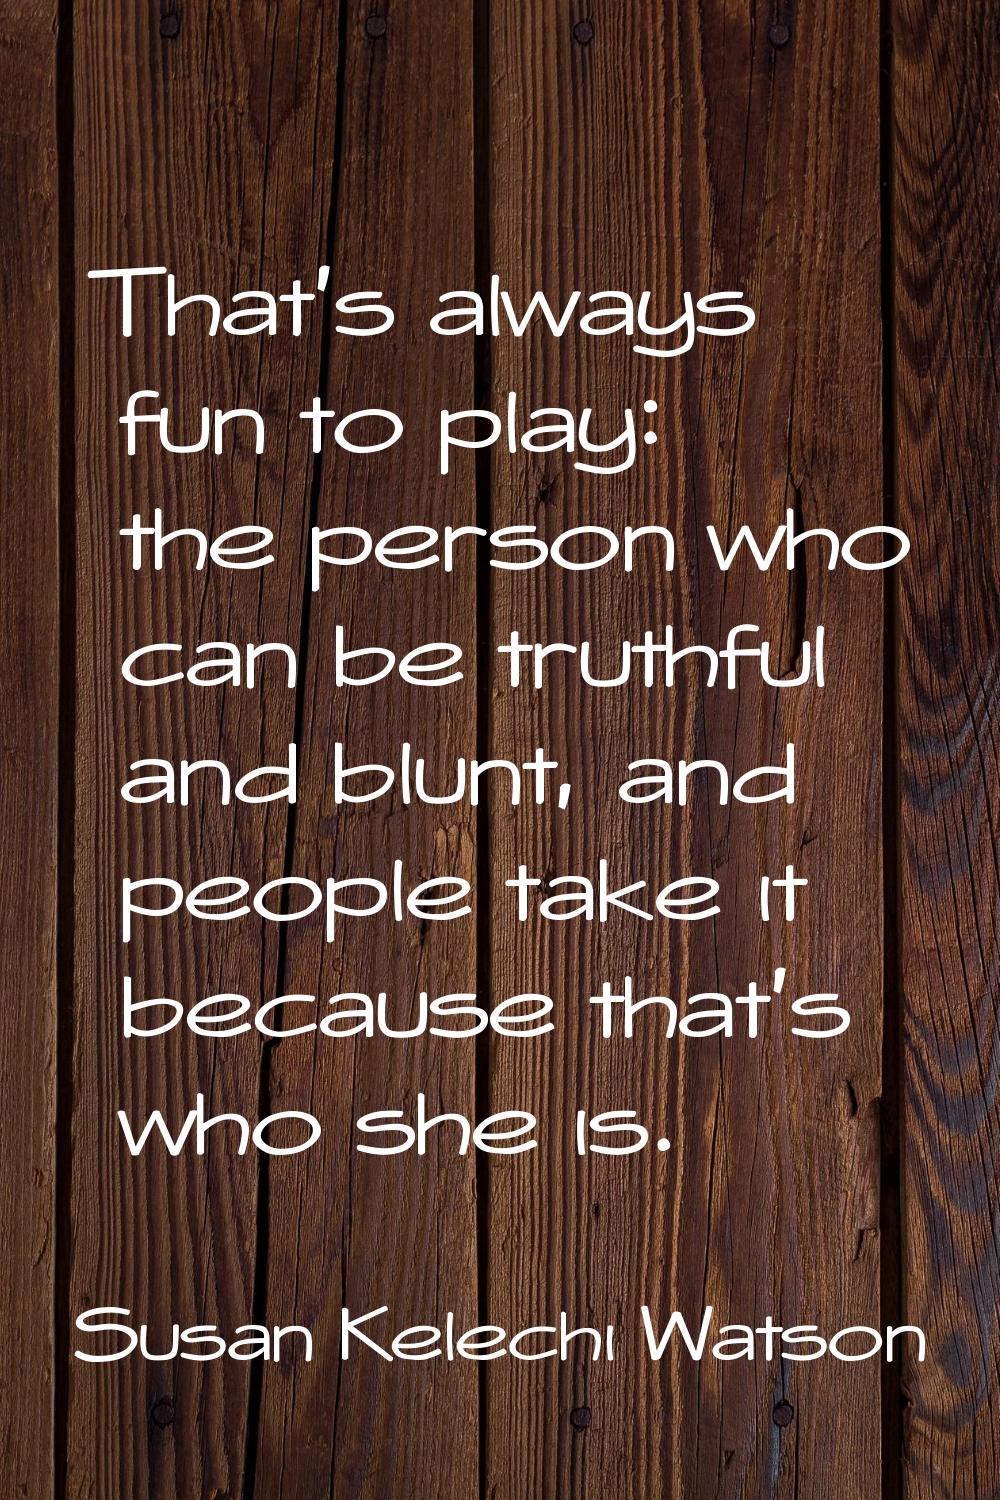 That's always fun to play: the person who can be truthful and blunt, and people take it because tha